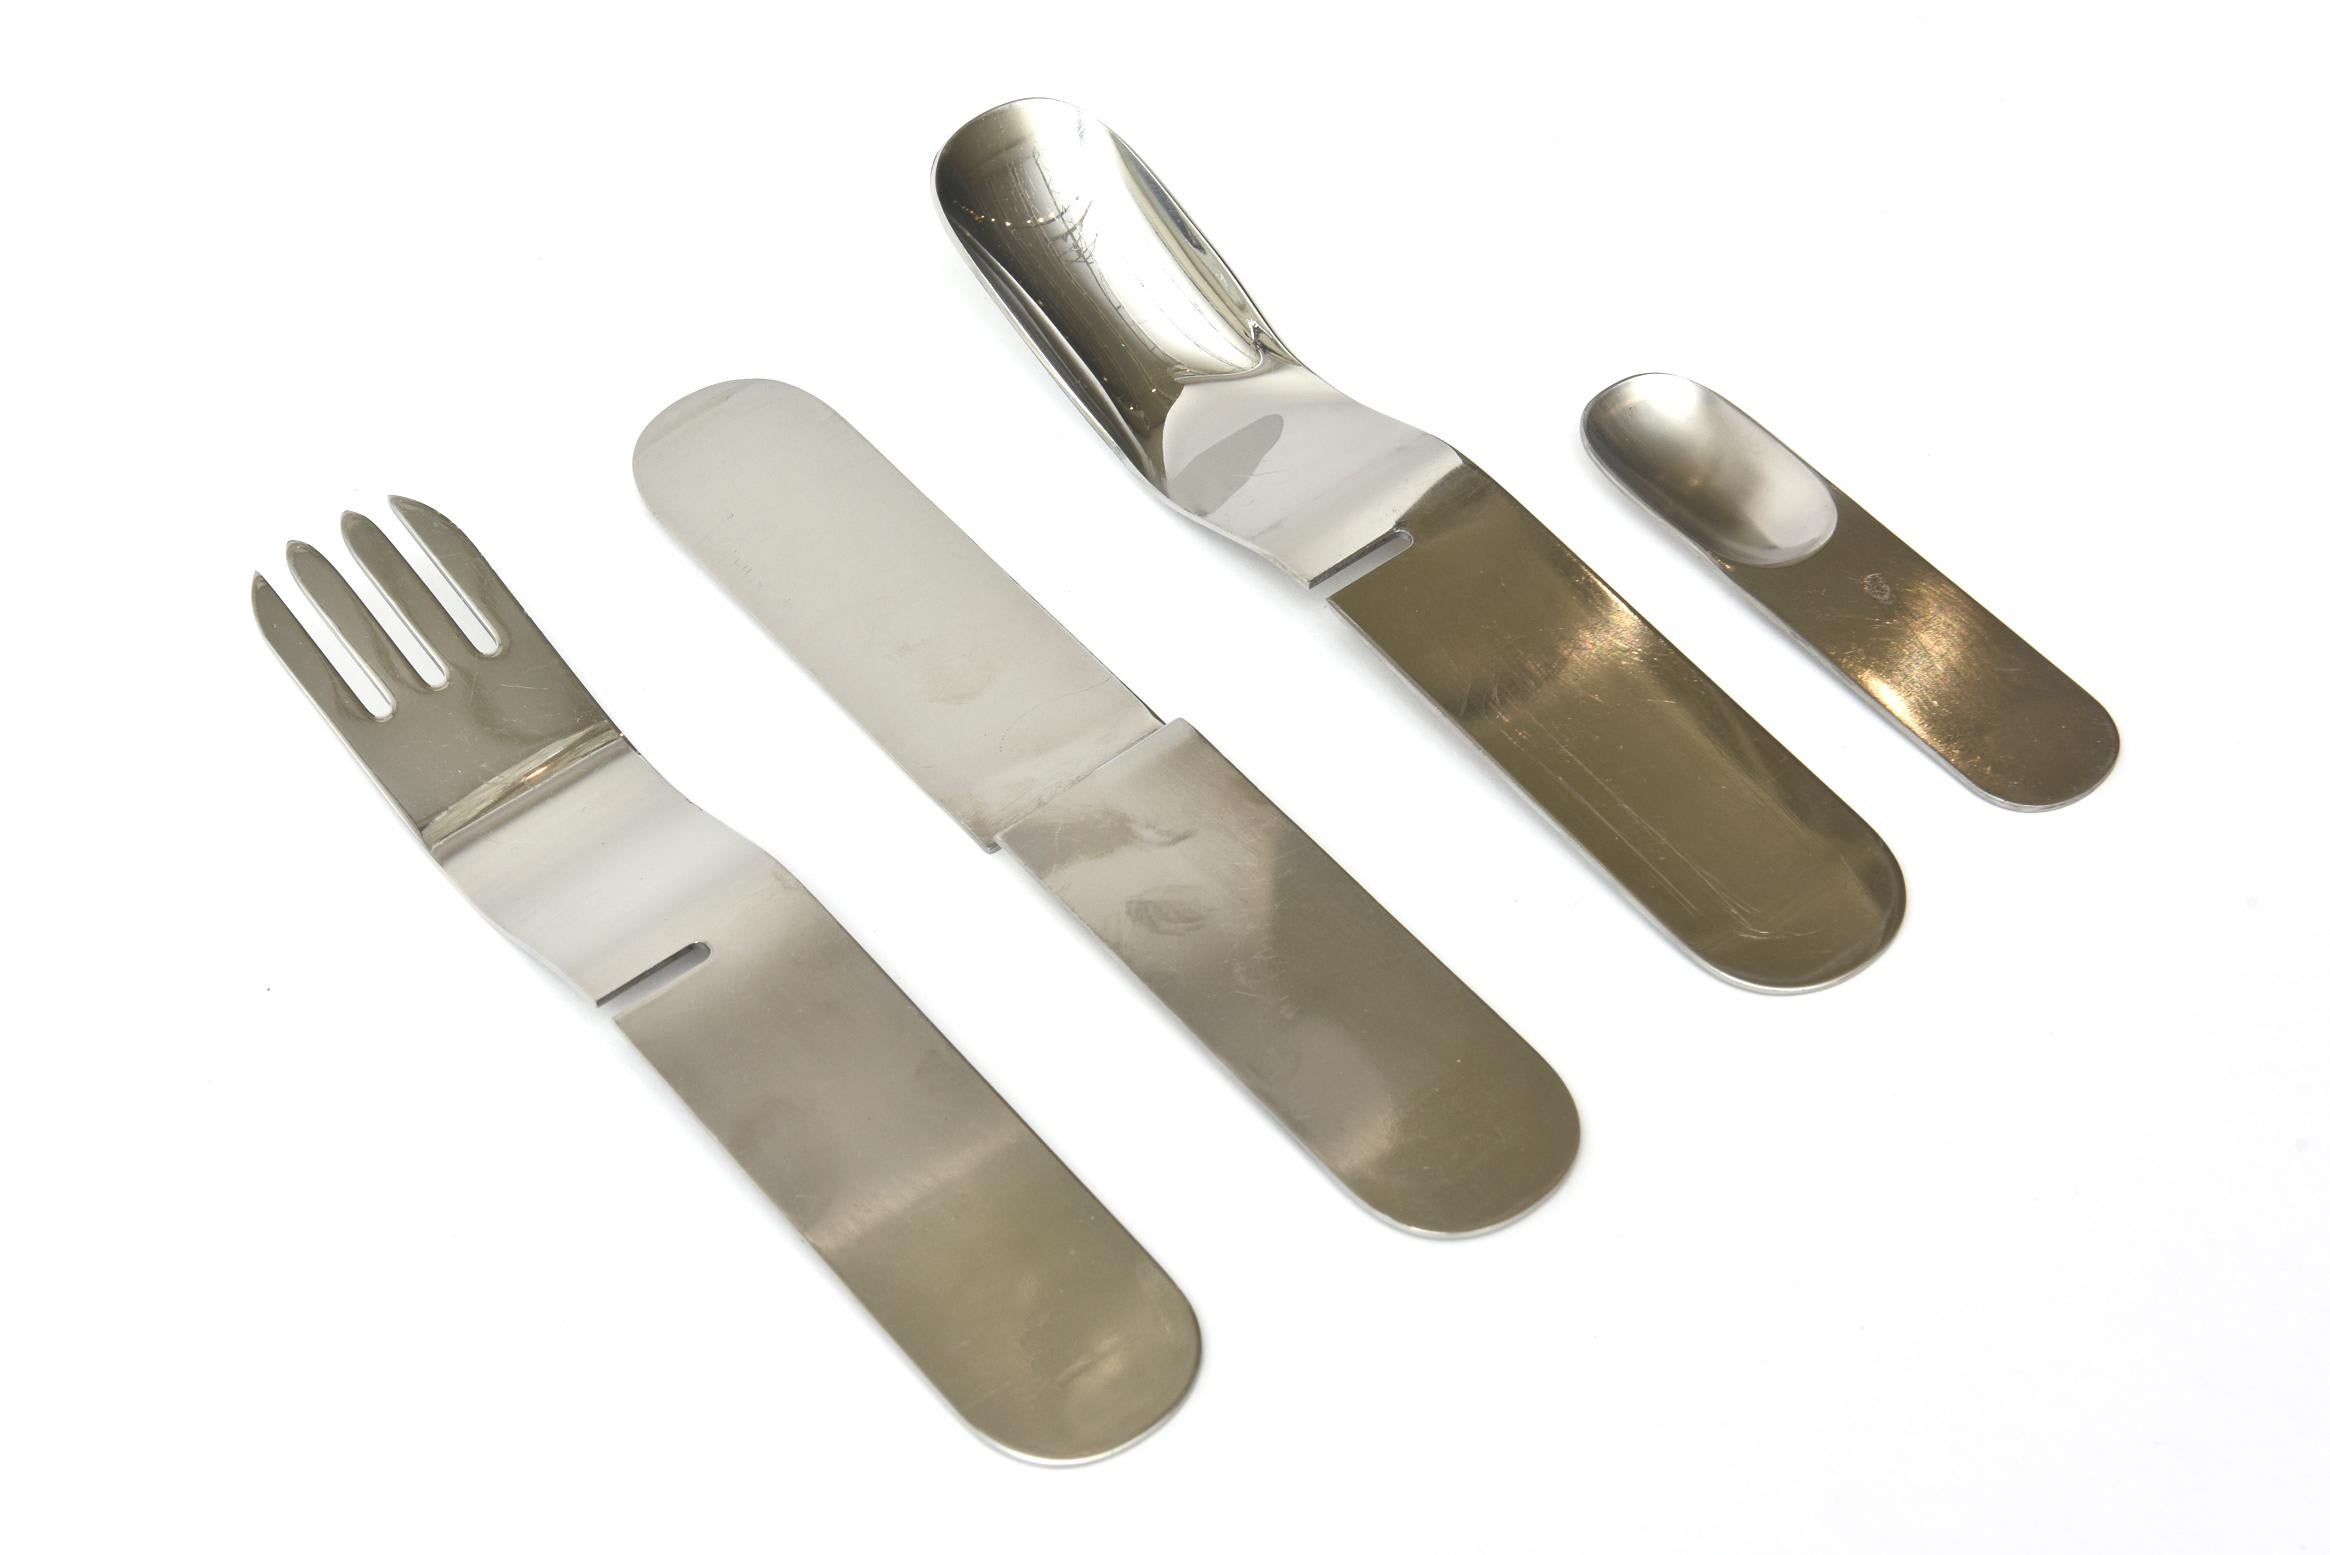 This modernist and avant garden Villeroy & Boch service for one stainless steel flatware set was made in West Germany in 1971 It is hallmarked on the back of each piece. It was part of a collection that was designed by the duality of Helen Von Both